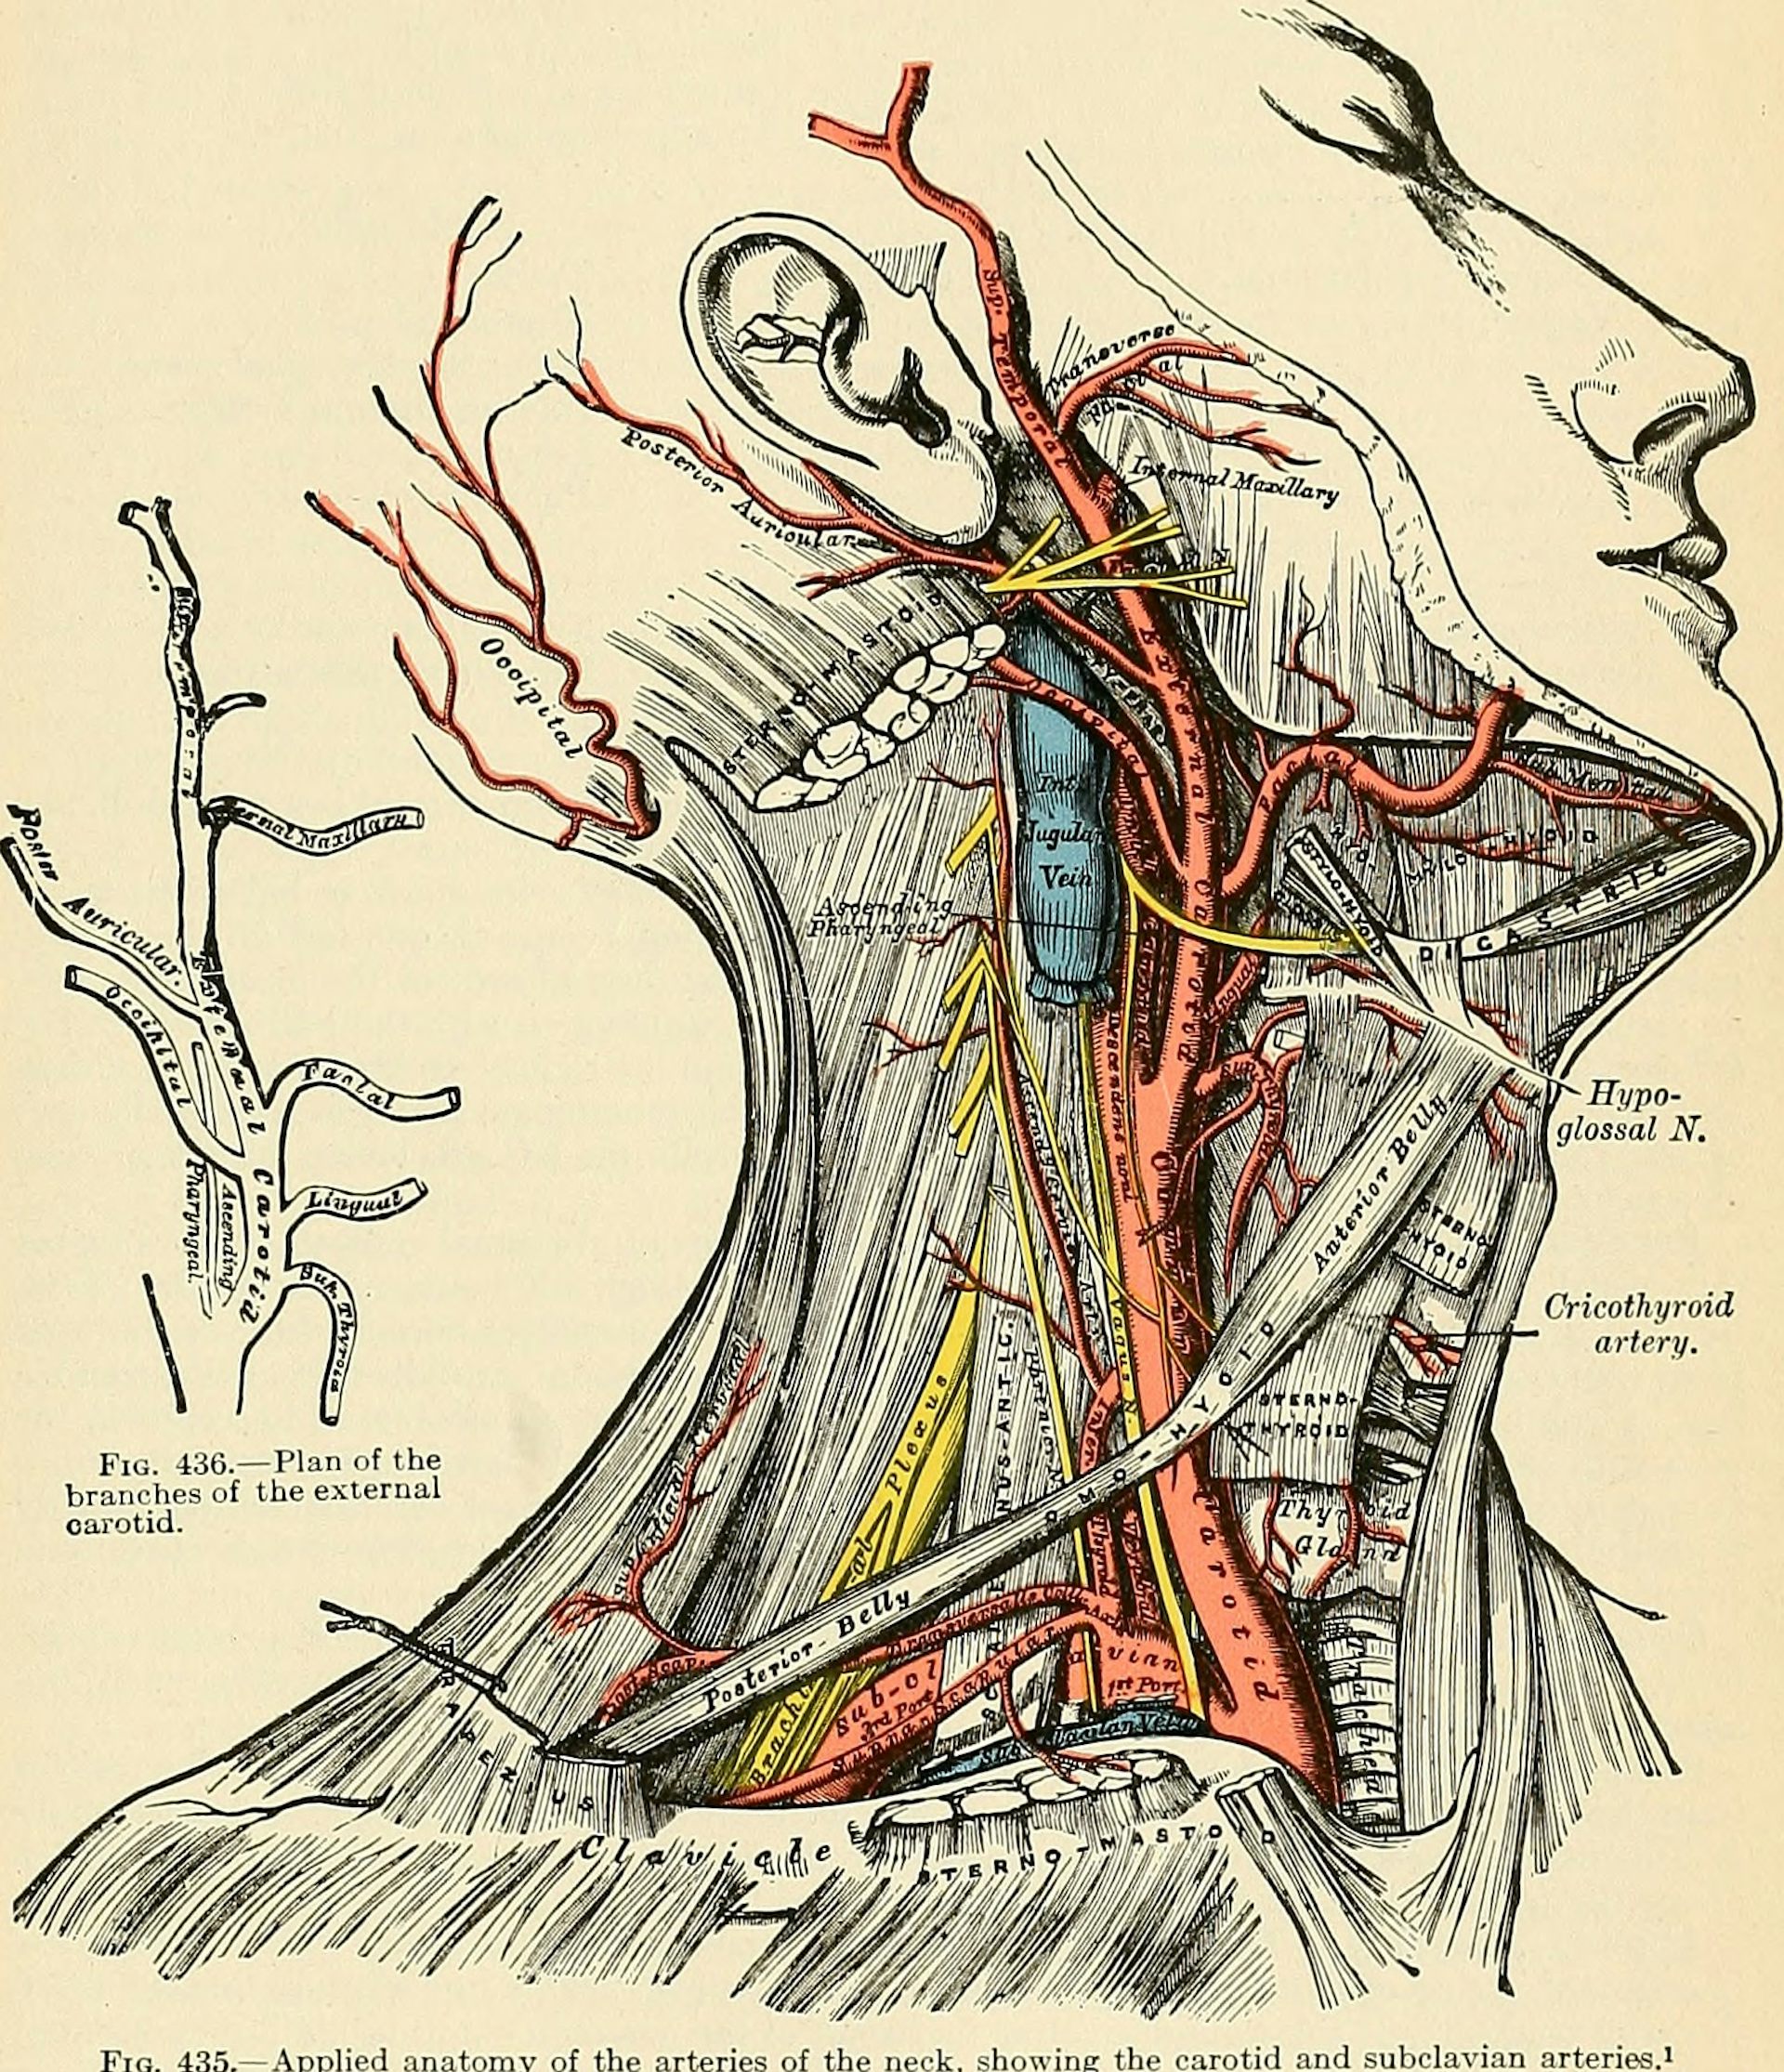 Pictures Have Been Teaching Doctors Medicine for Centuries − a Medical Illustrator Explains How